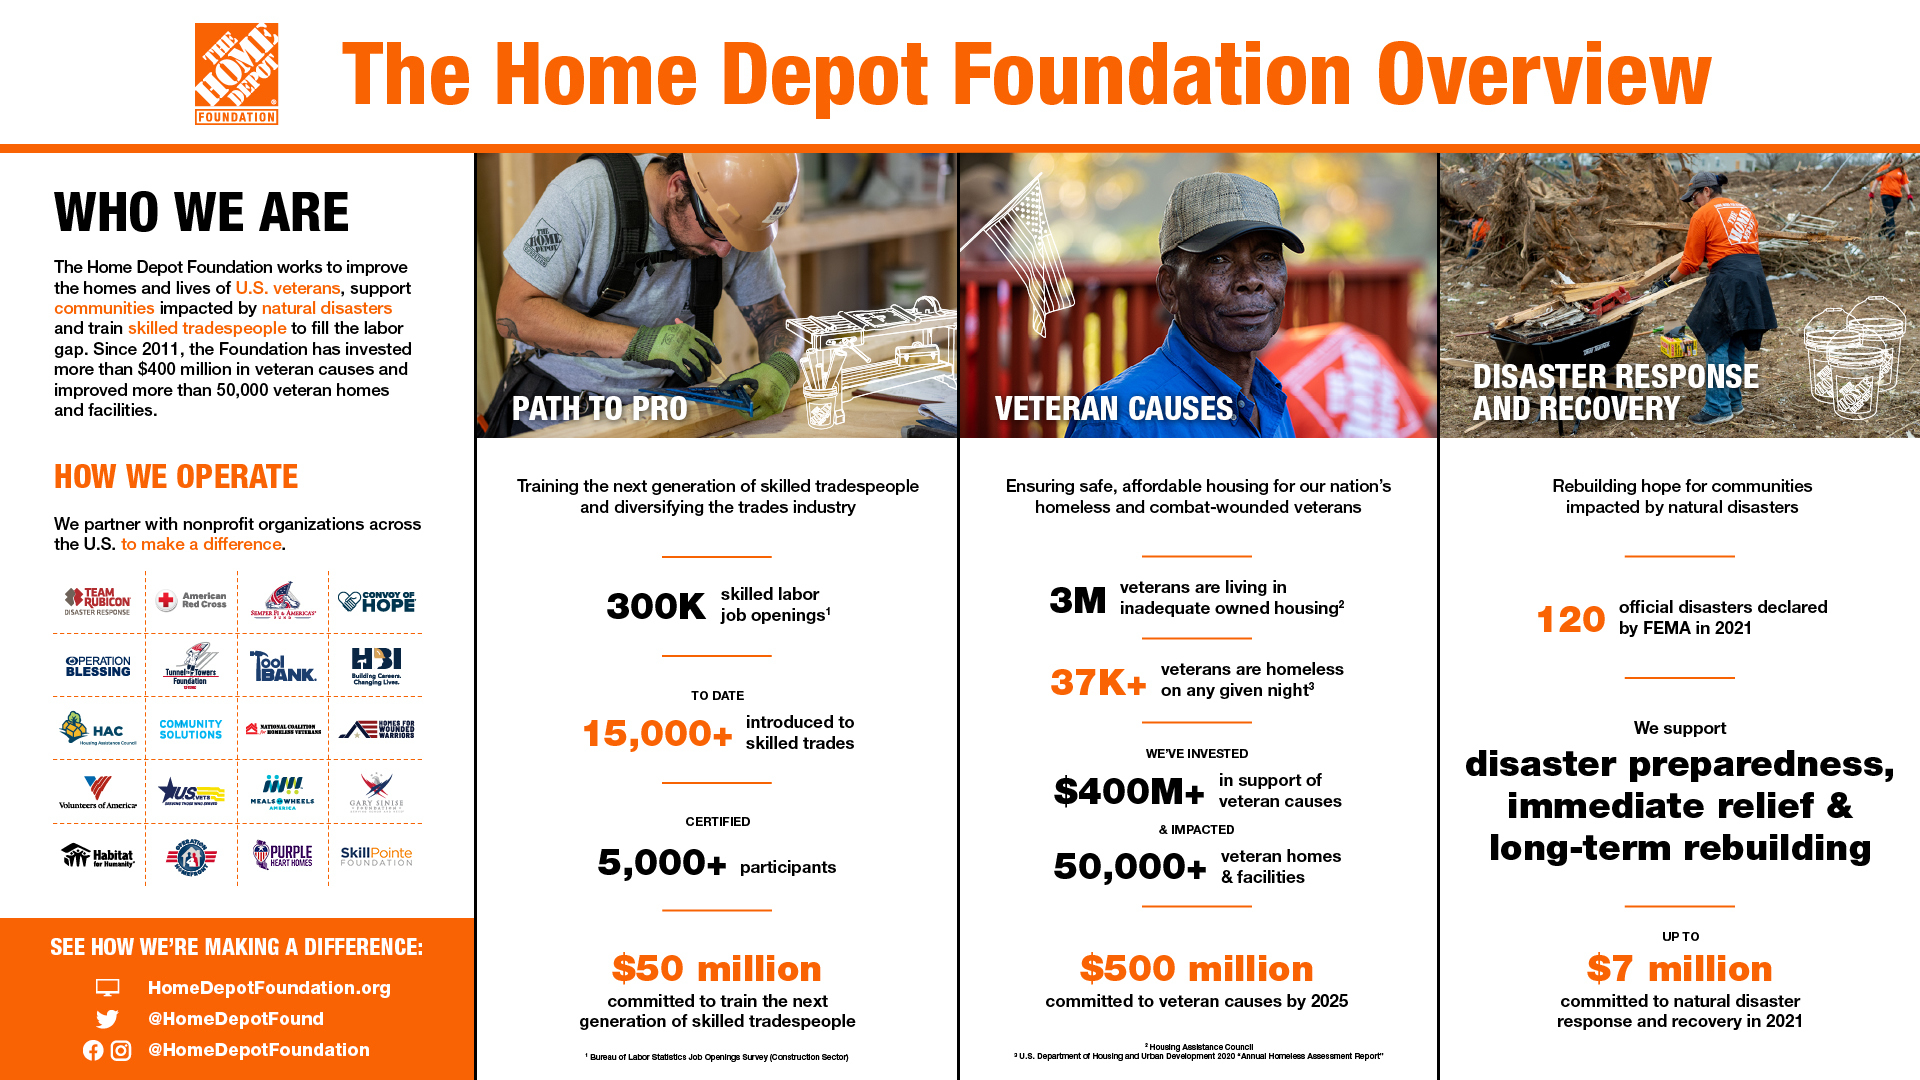 The Home Depot Foundation Giving Overview